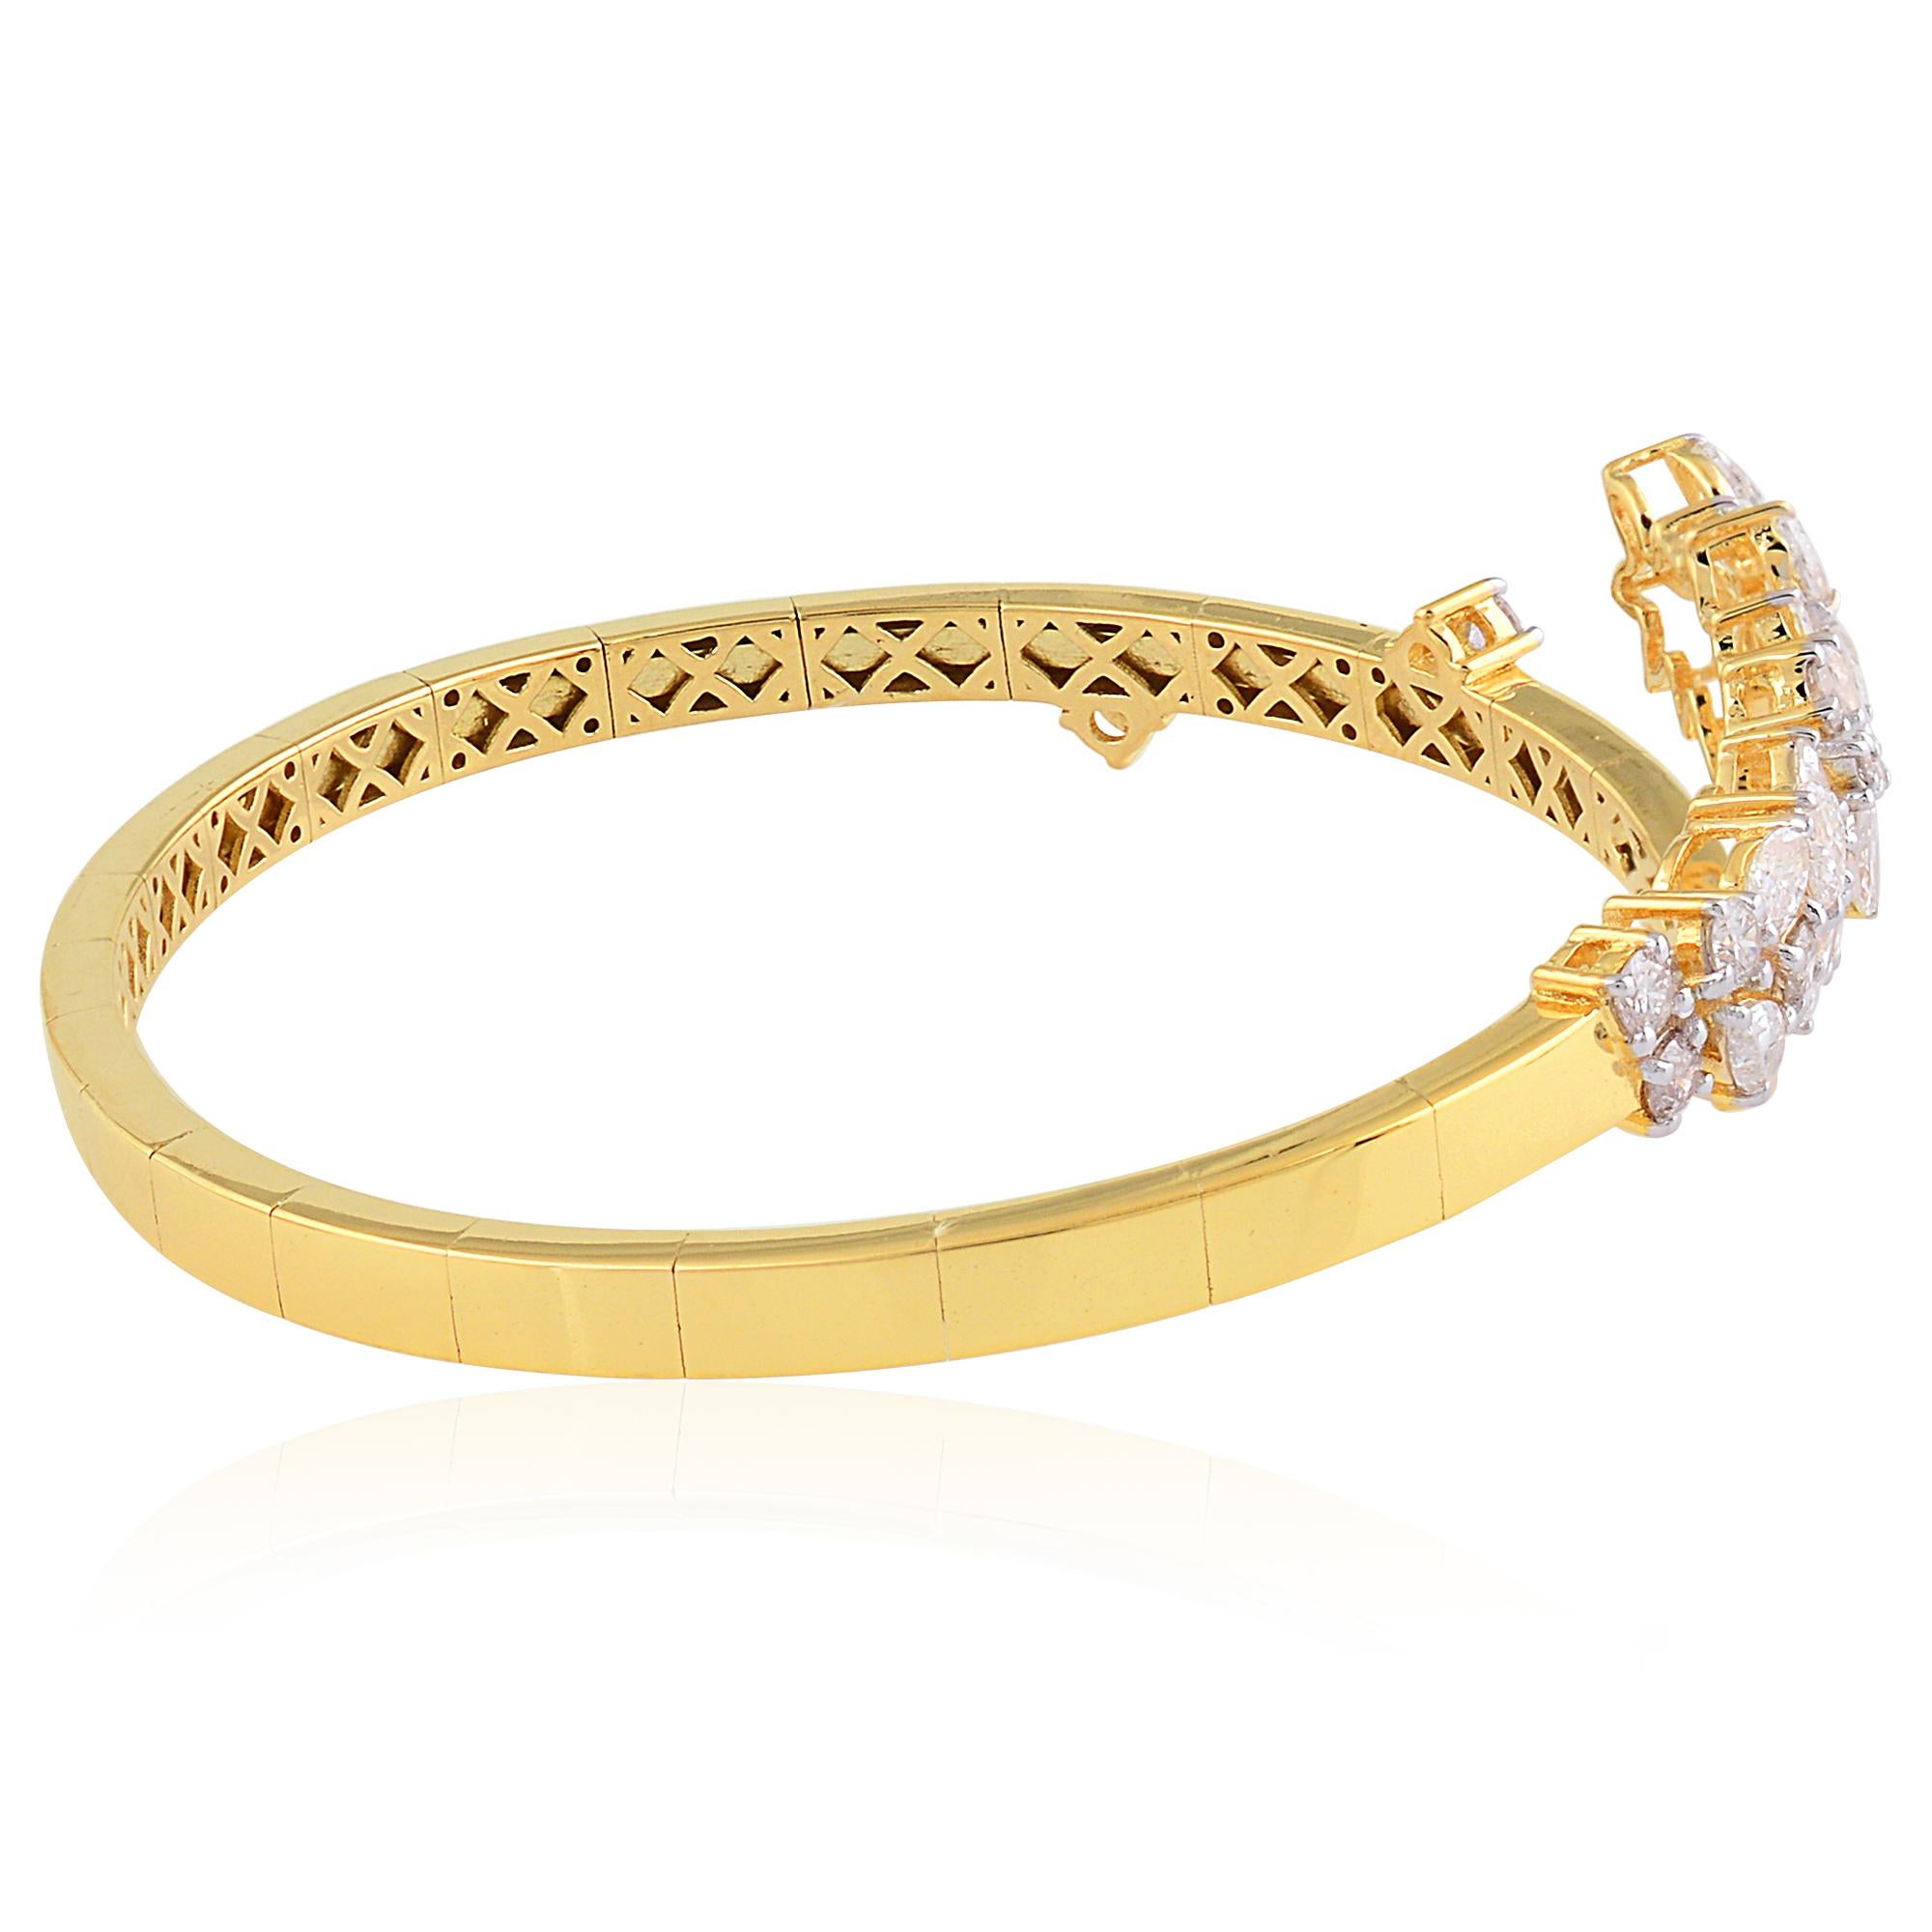 The design of this bangle bracelet is as striking as it is versatile. The cuff style allows for easy wear and removal, while the meticulously crafted gold setting provides both strength and flexibility, ensuring a comfortable fit for any wrist size.